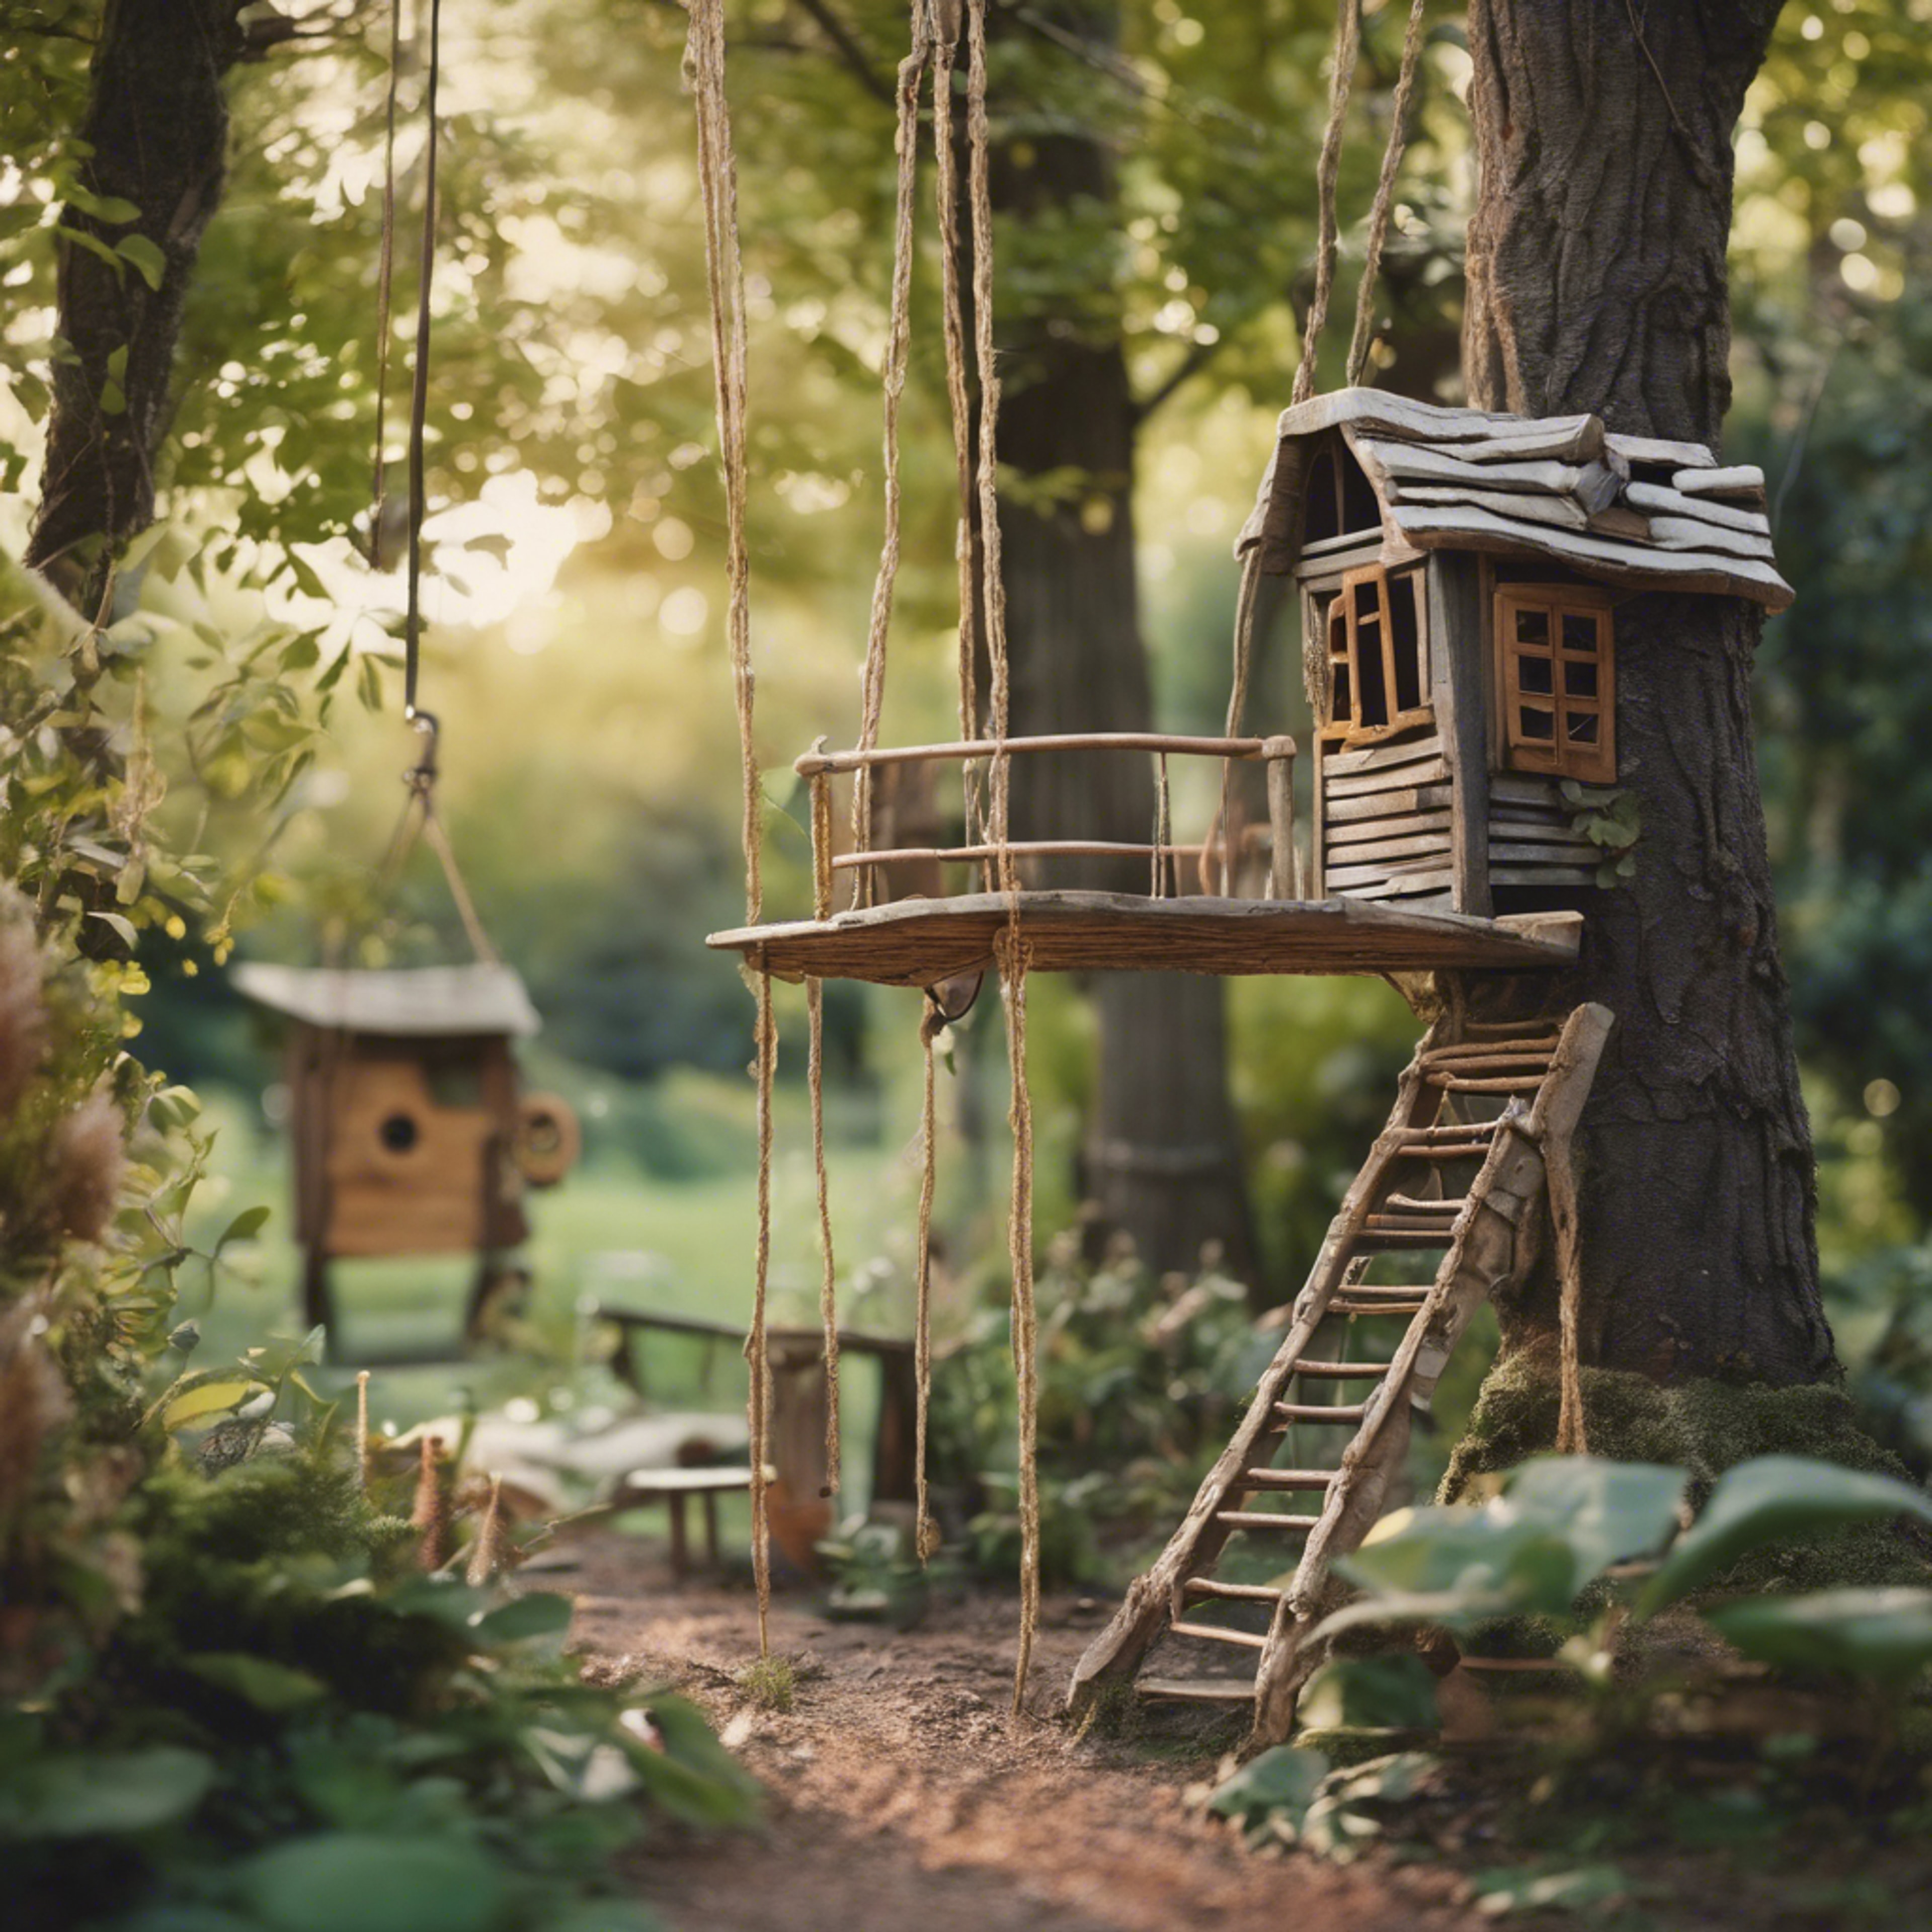 A nostalgic children’s garden filled with hidden treasures, tire swings, and treehouses built amidst towering trees. Fondo de pantalla[4077f42451f34ca69b37]